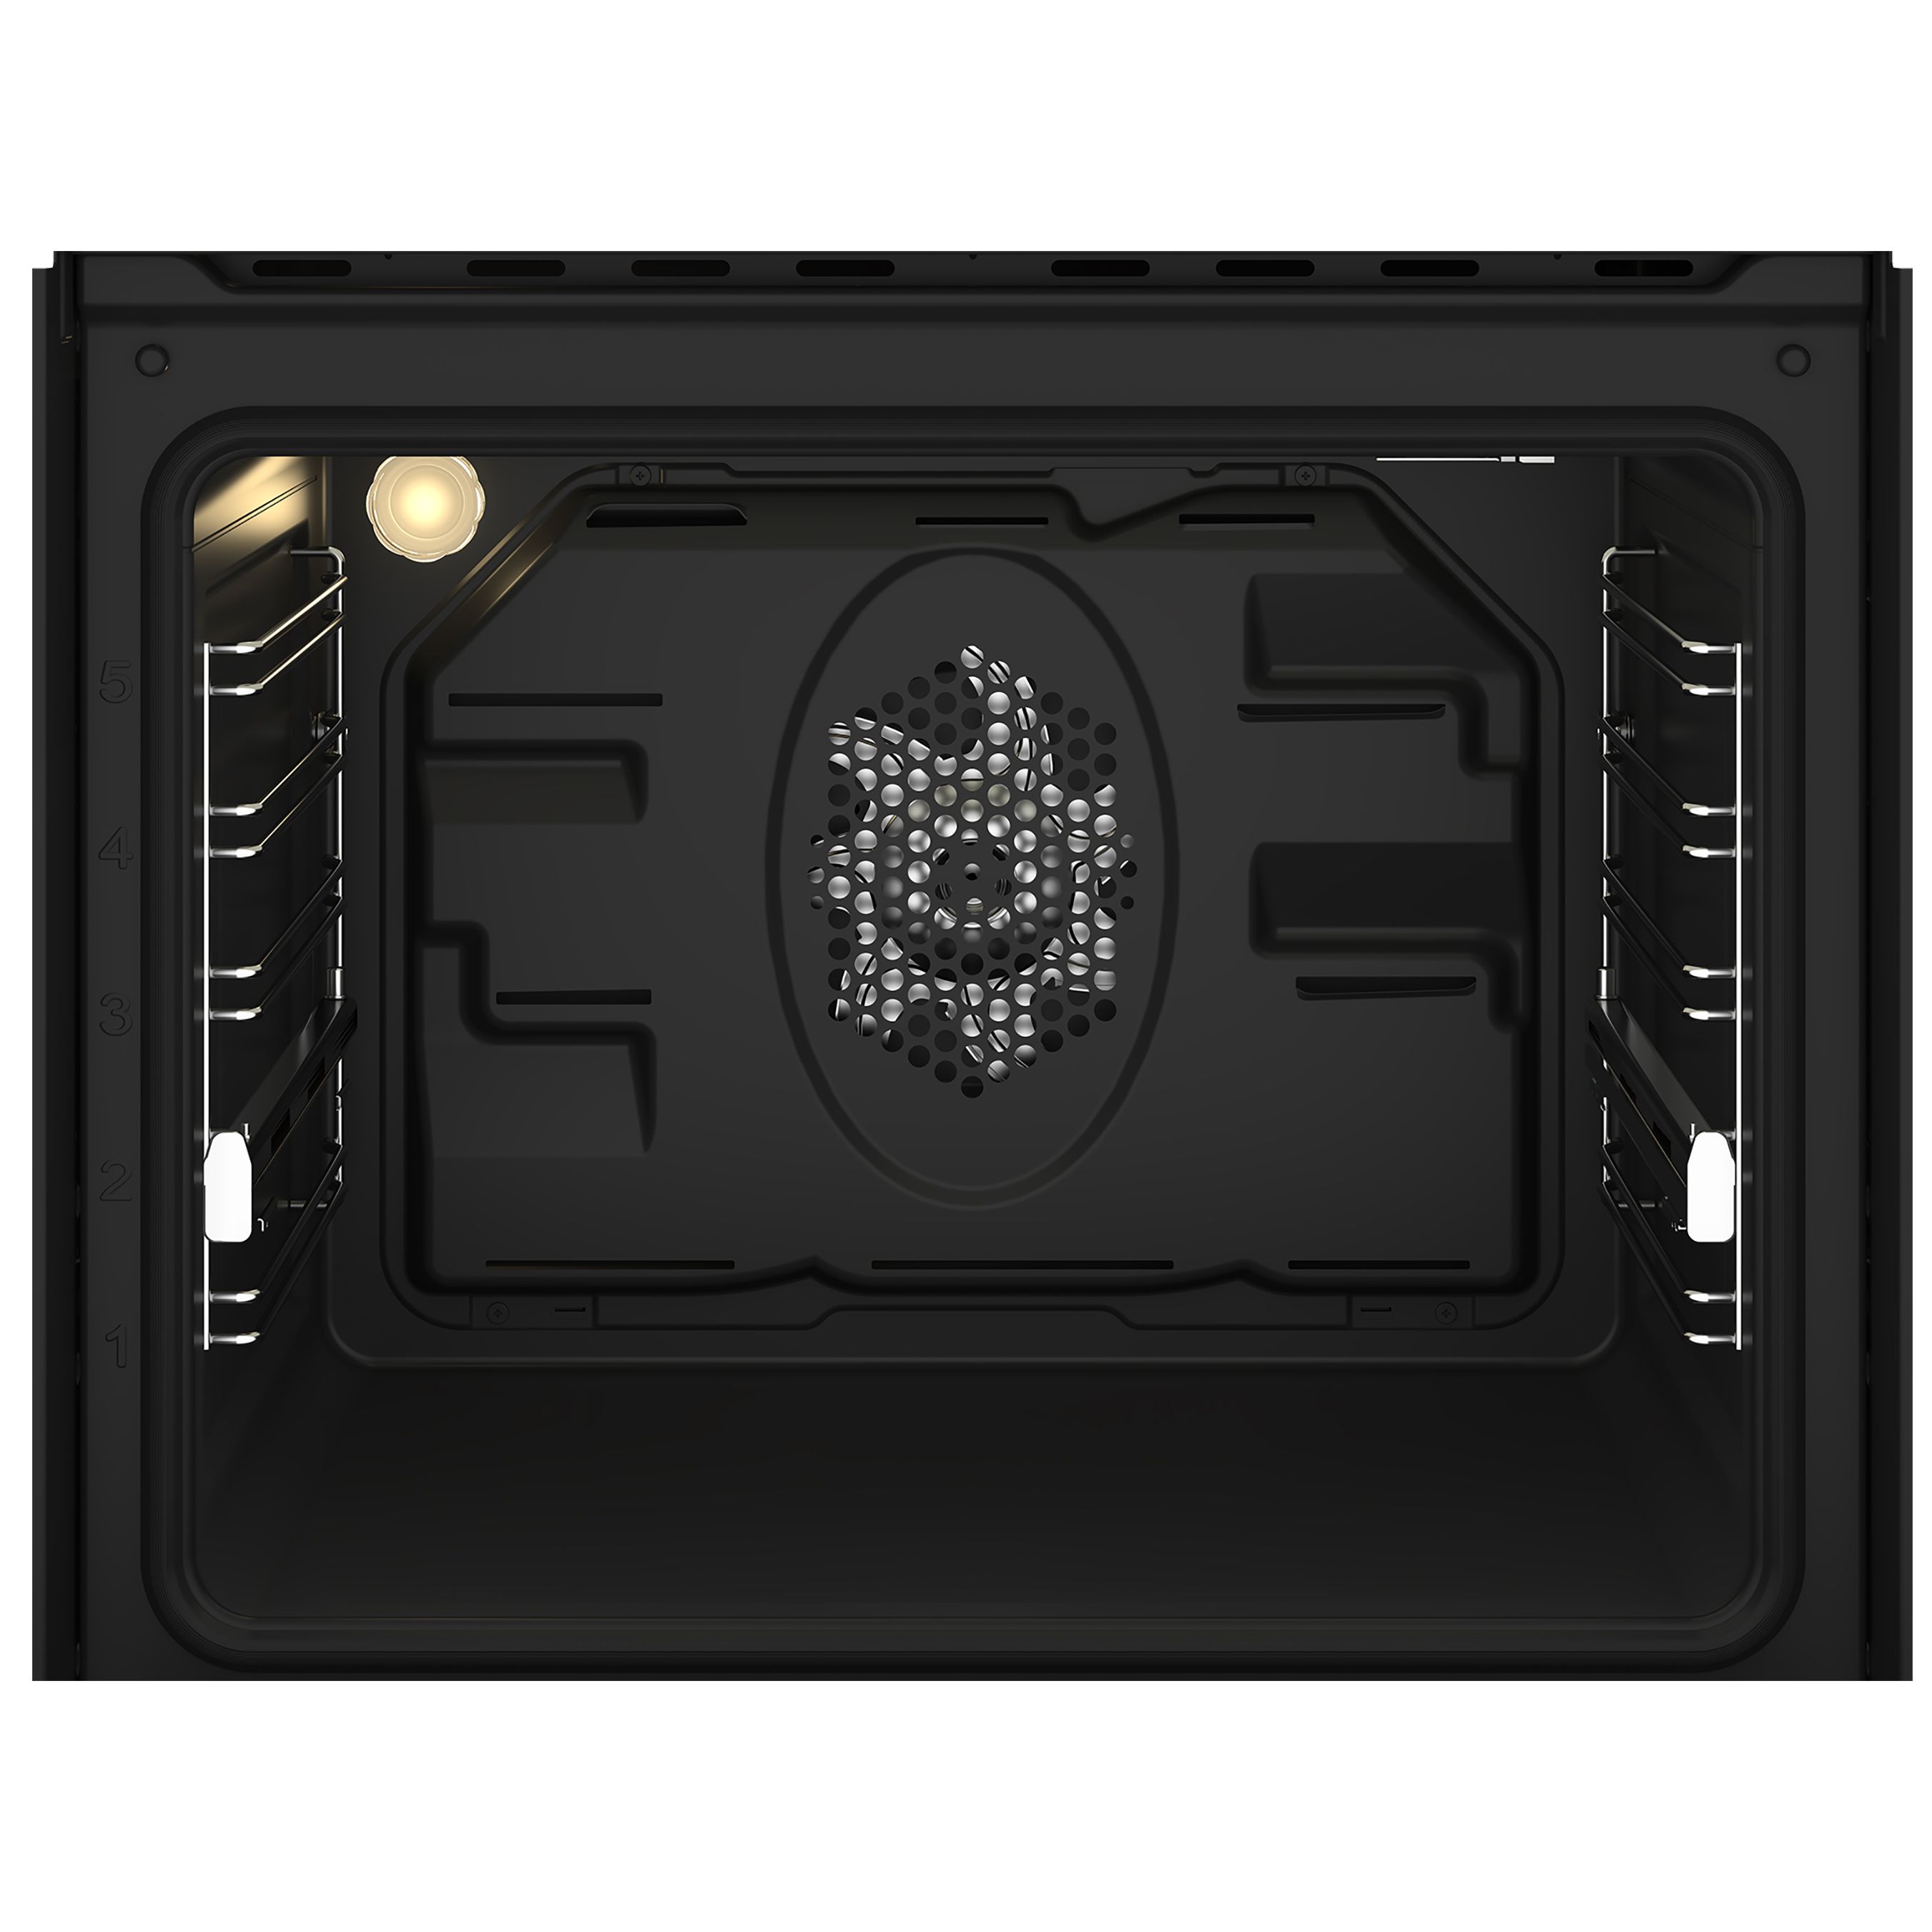 Beko BBDQF22300X Built-in Double Oven - Stainless steel effect